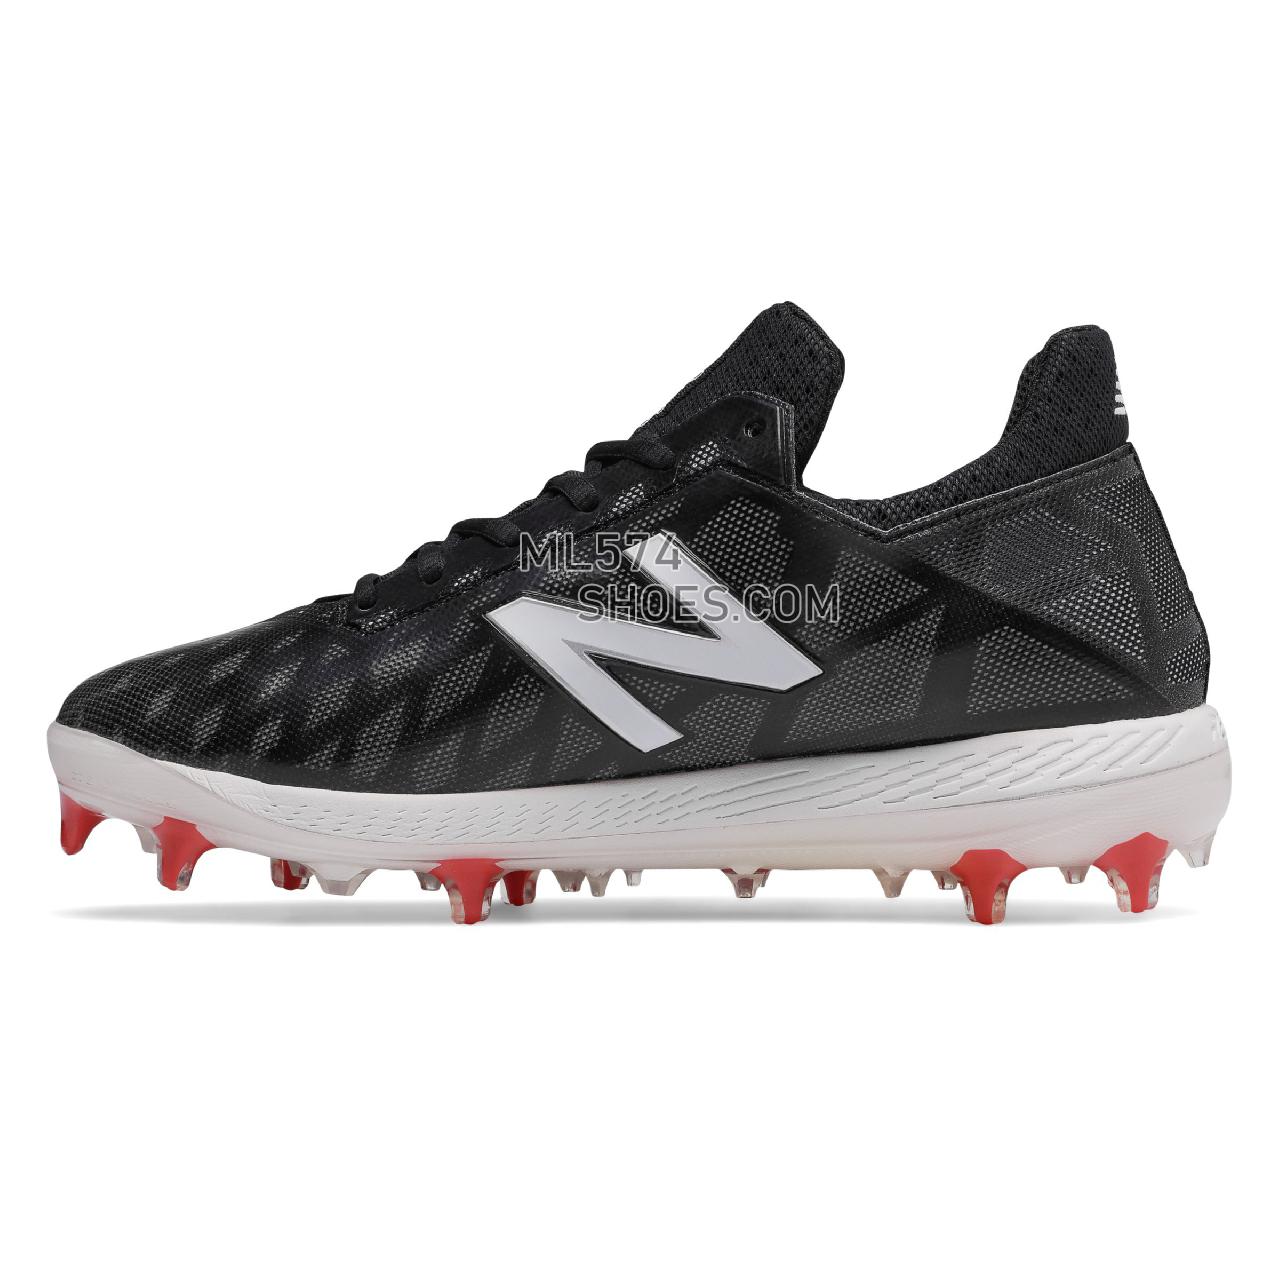 New Balance COMPv1 - Men's 1 - Baseball Black with White and Red - COMPBK1